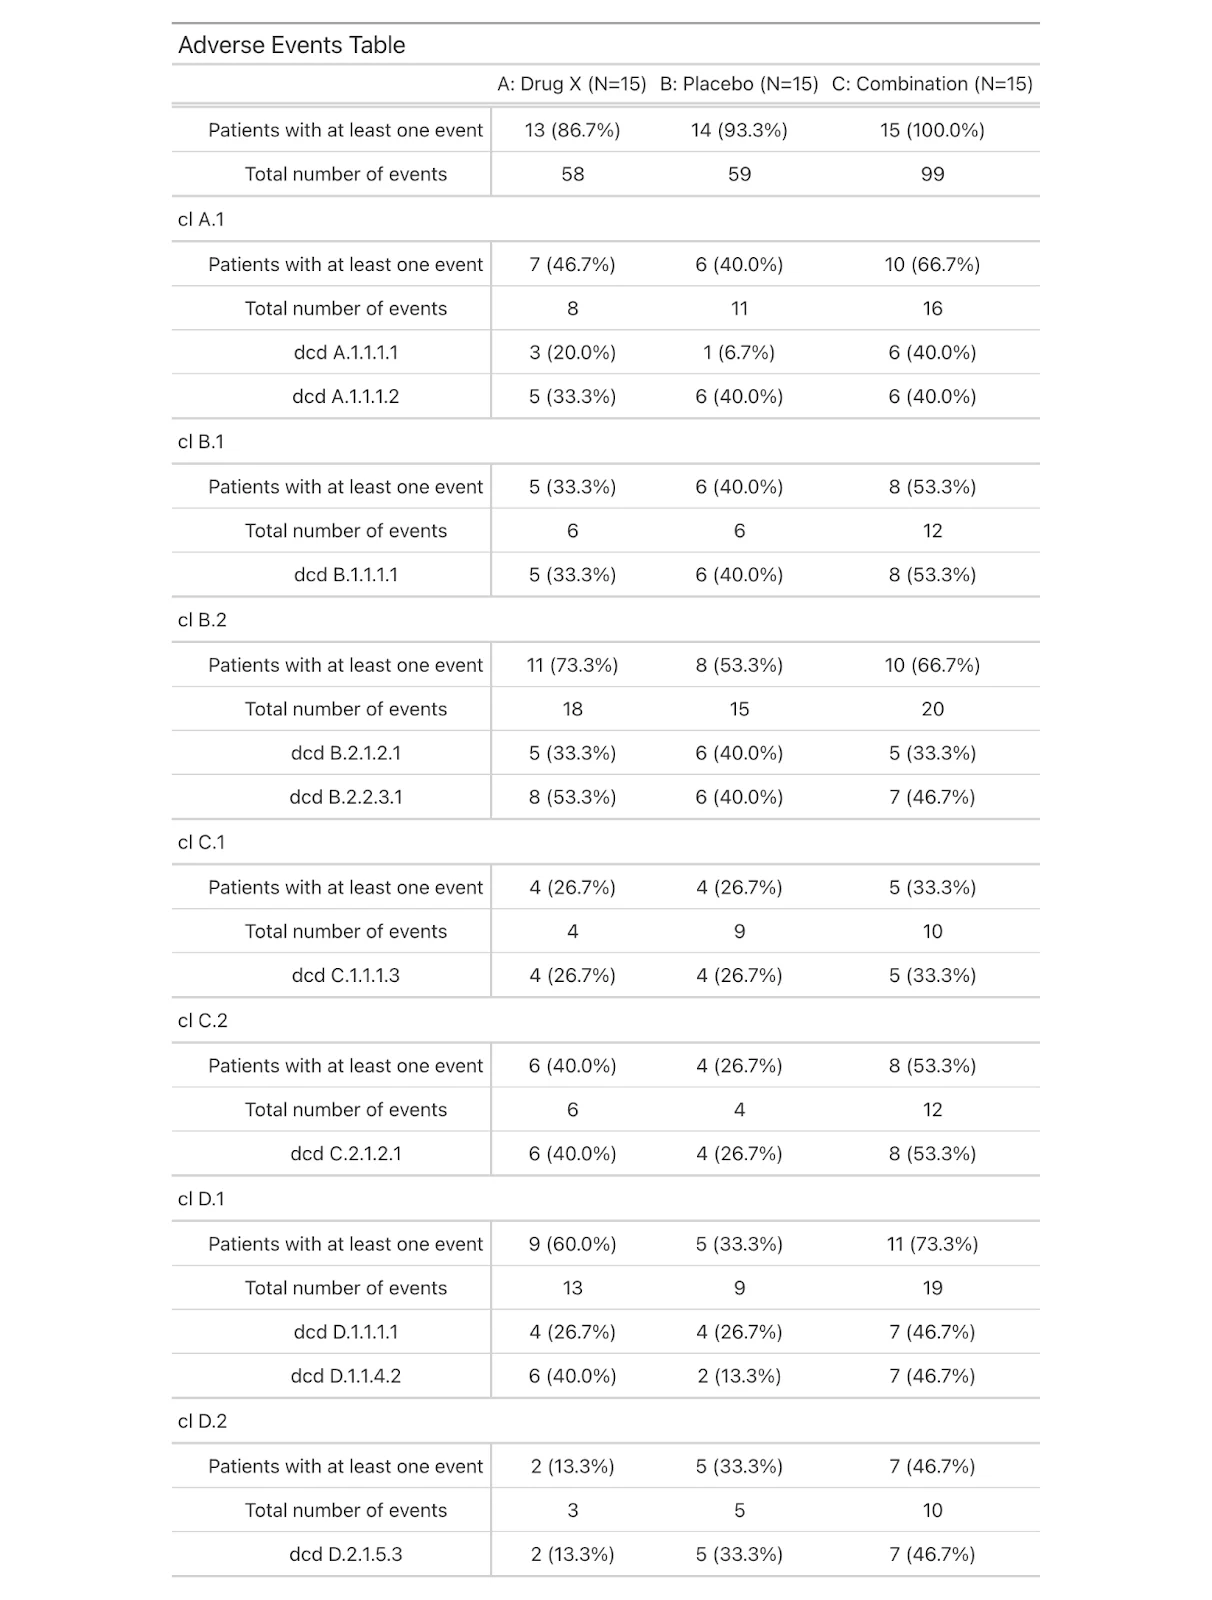 The table provides a comparative overview of the incidence and number of adverse events recorded in a clinical trial across different treatment groups: Drug X, Placebo, and a Combination of treatments.